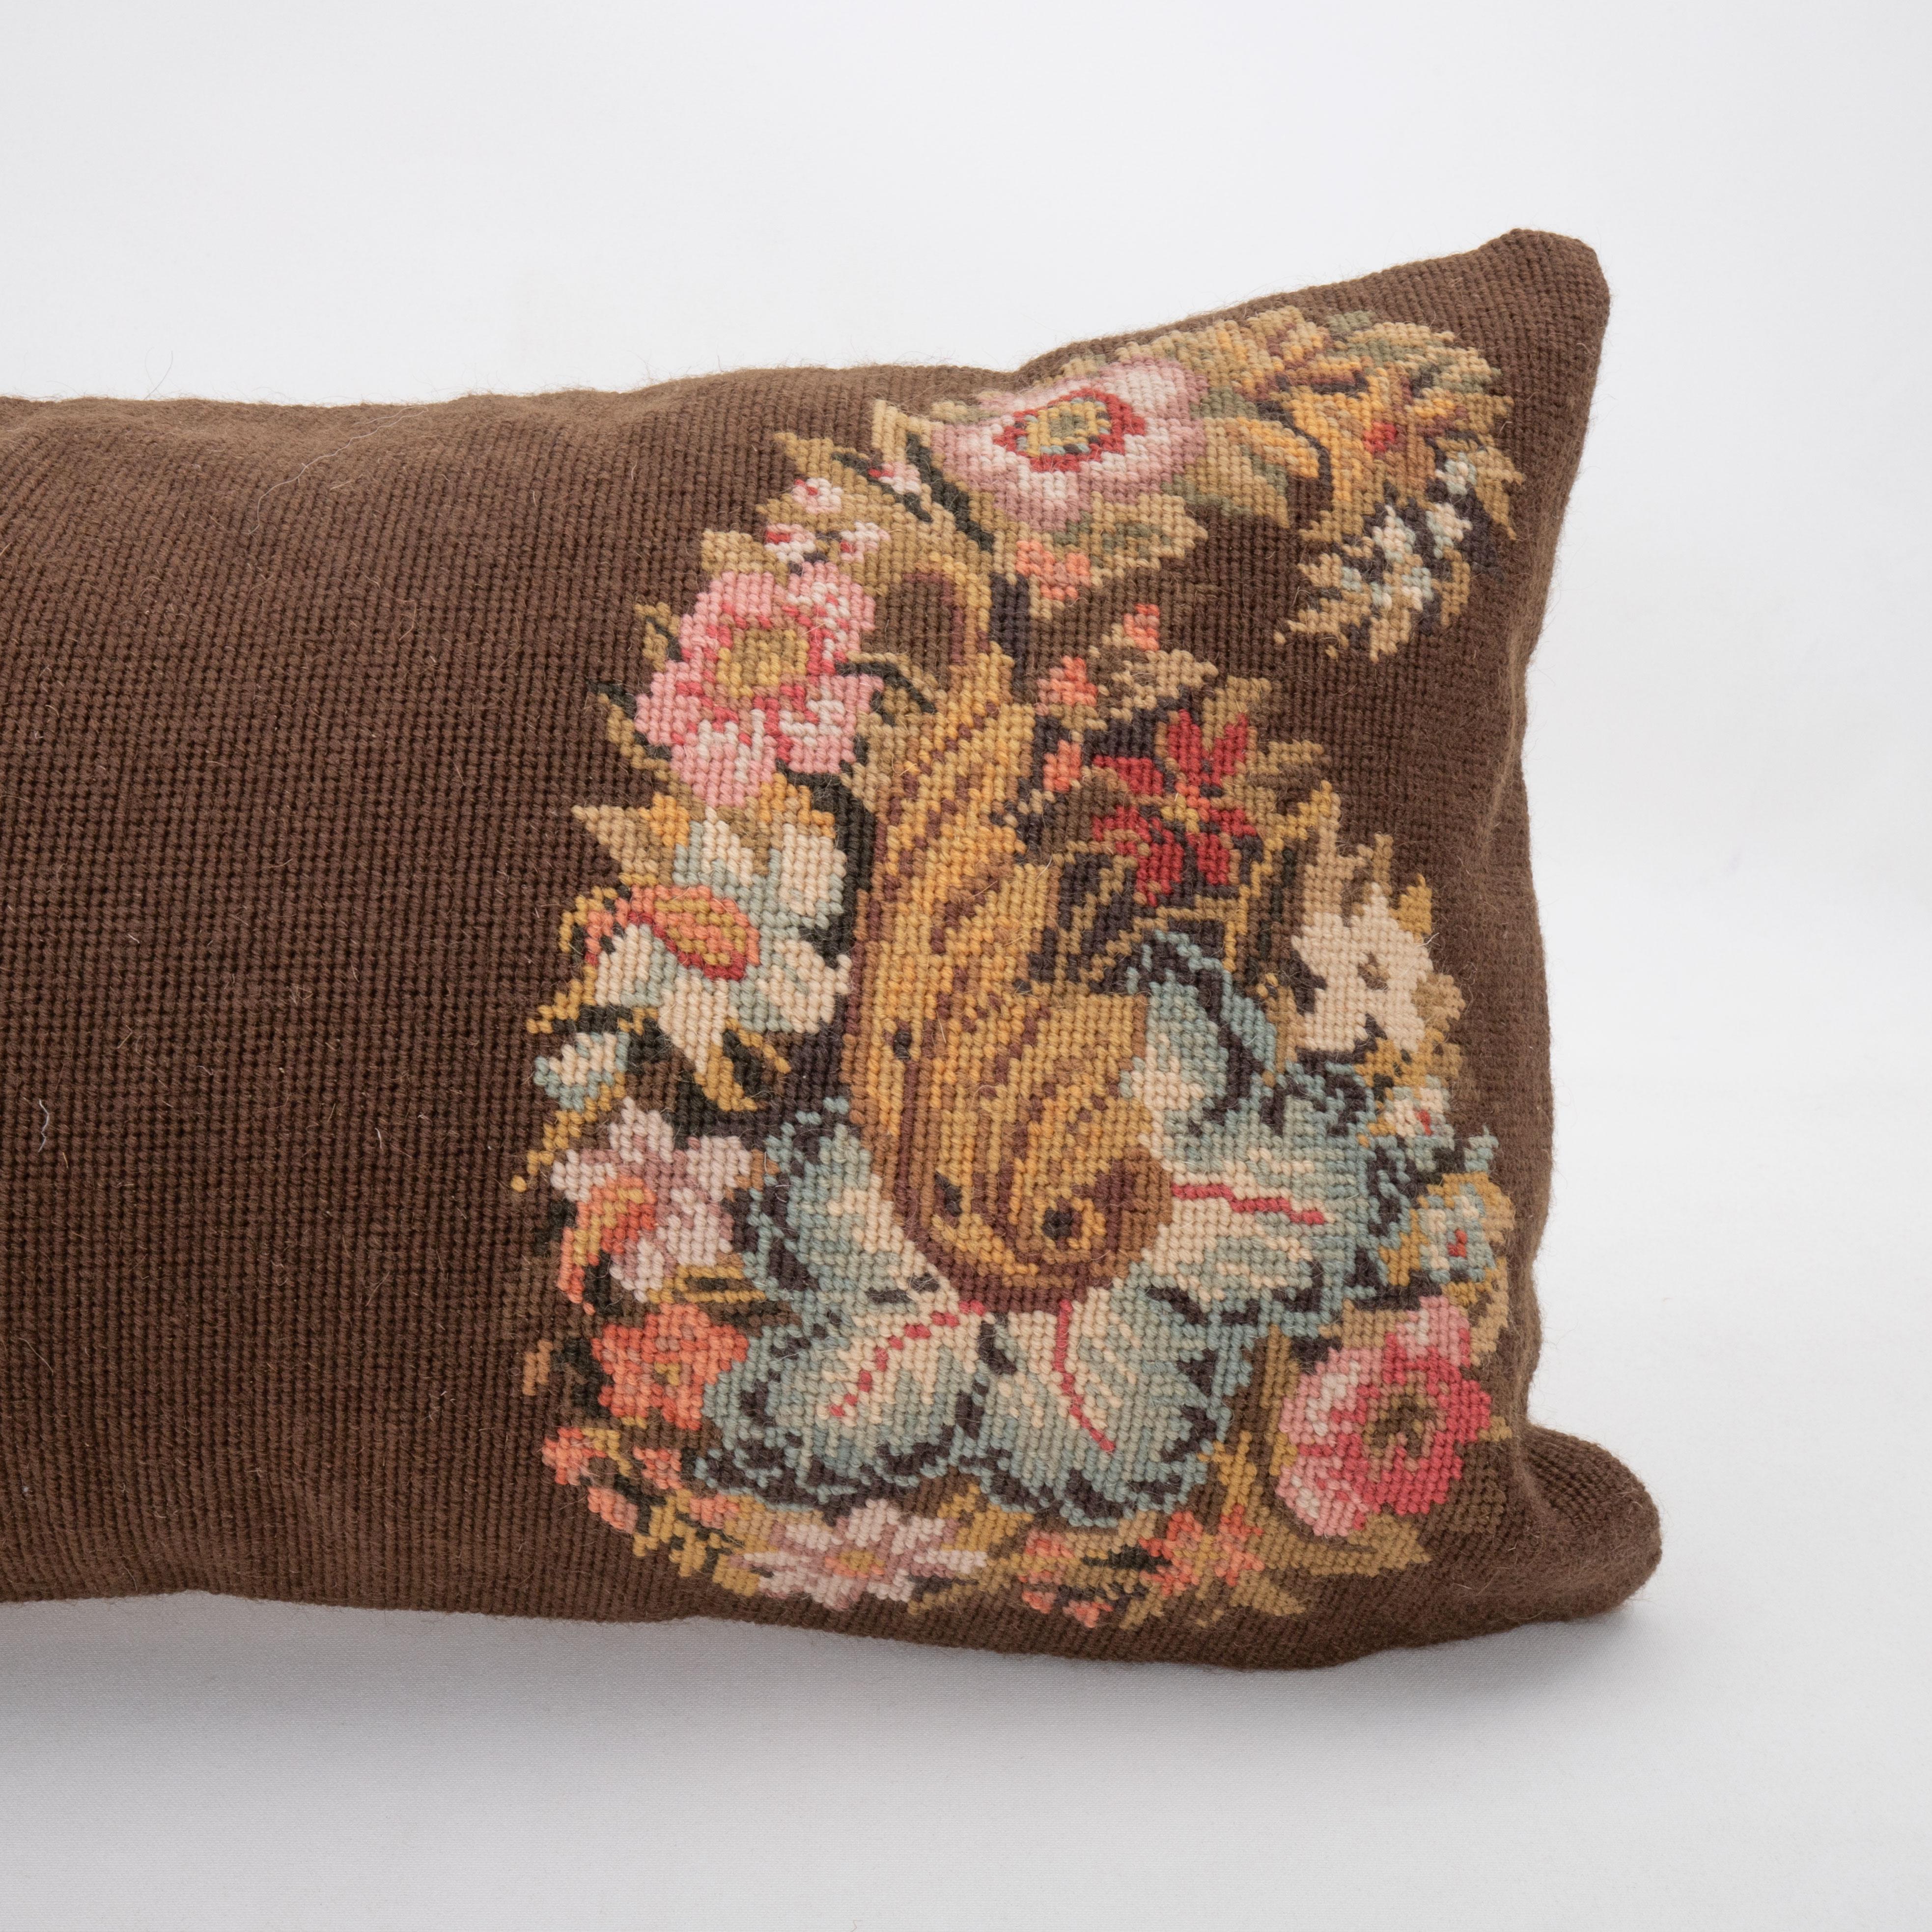 Embroidered Pillow Case Made from a European Embroidery, E 20th C. For Sale